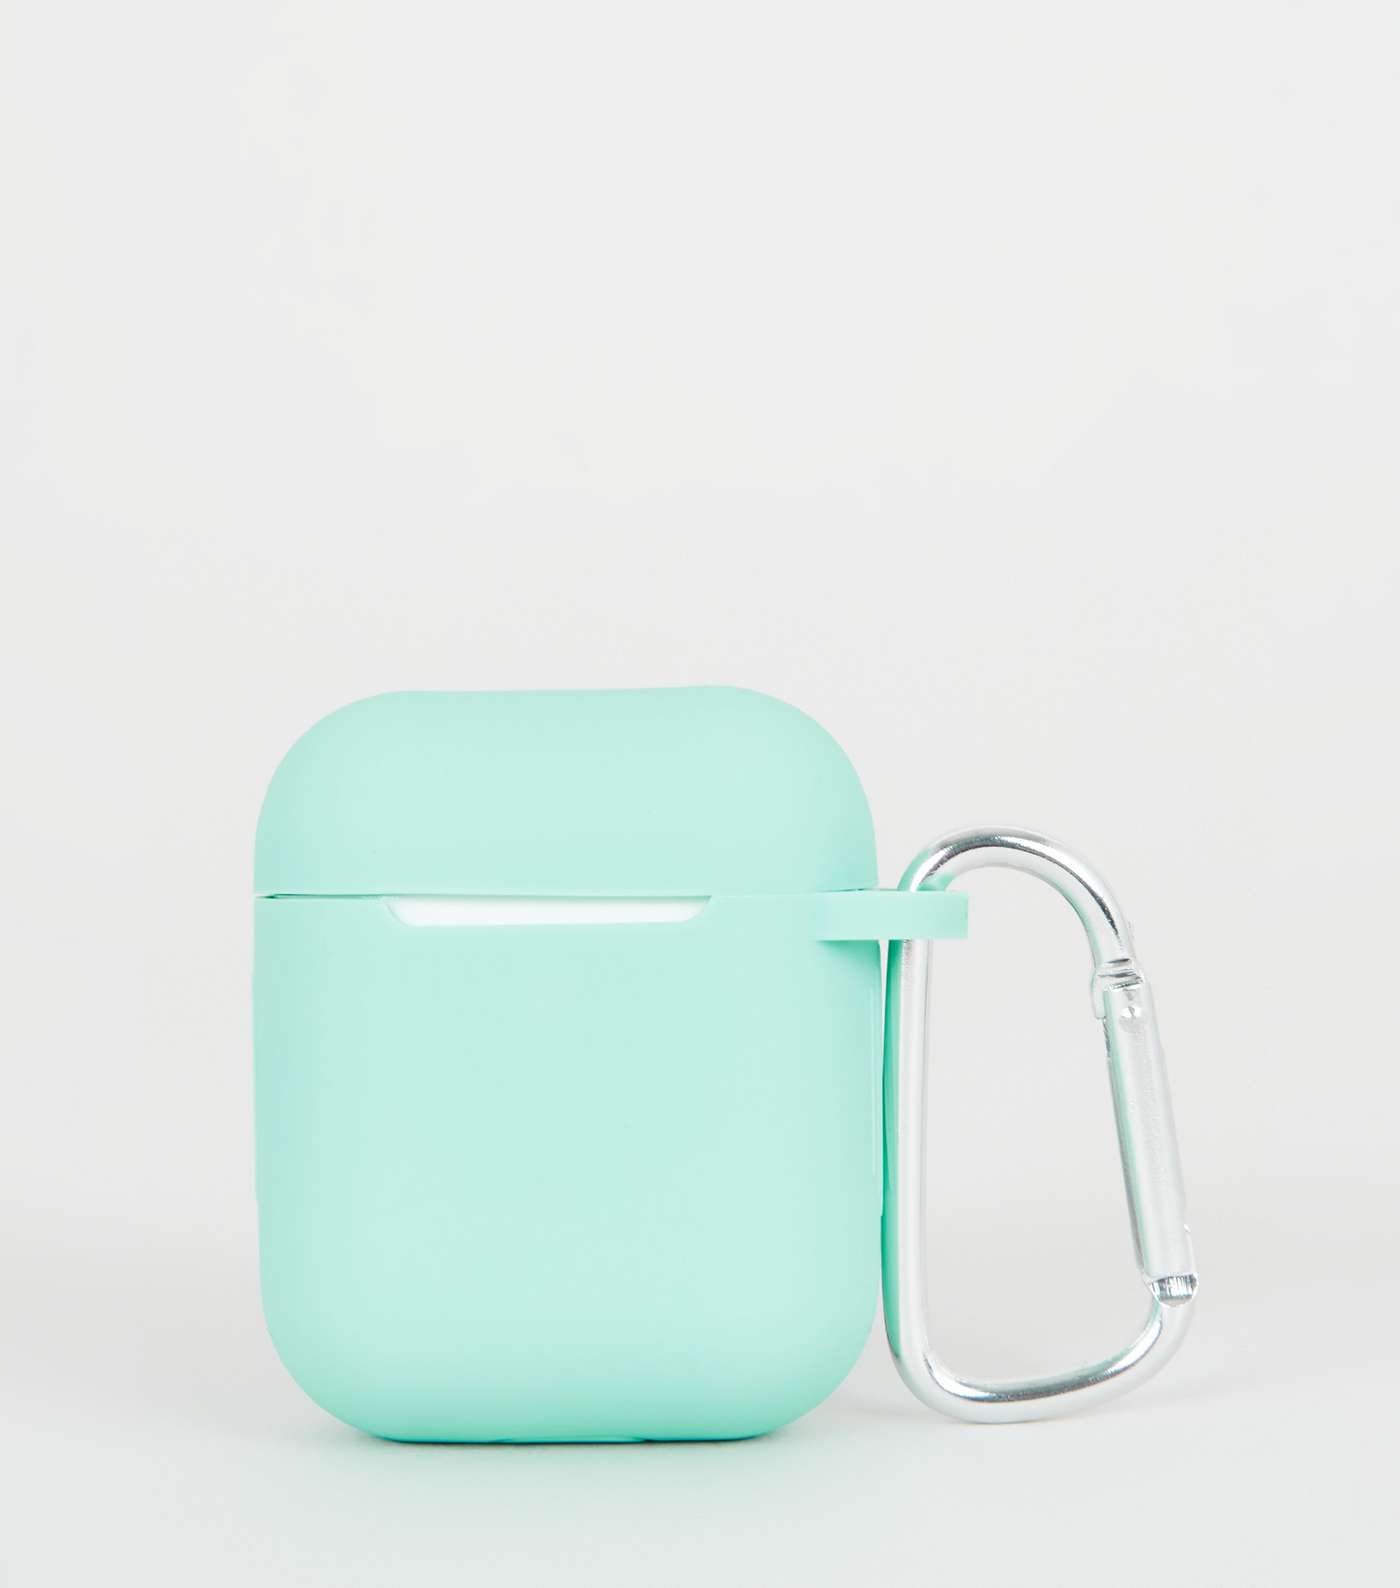 Turquoise Mini Silicone Case for AirPods 1 and 2